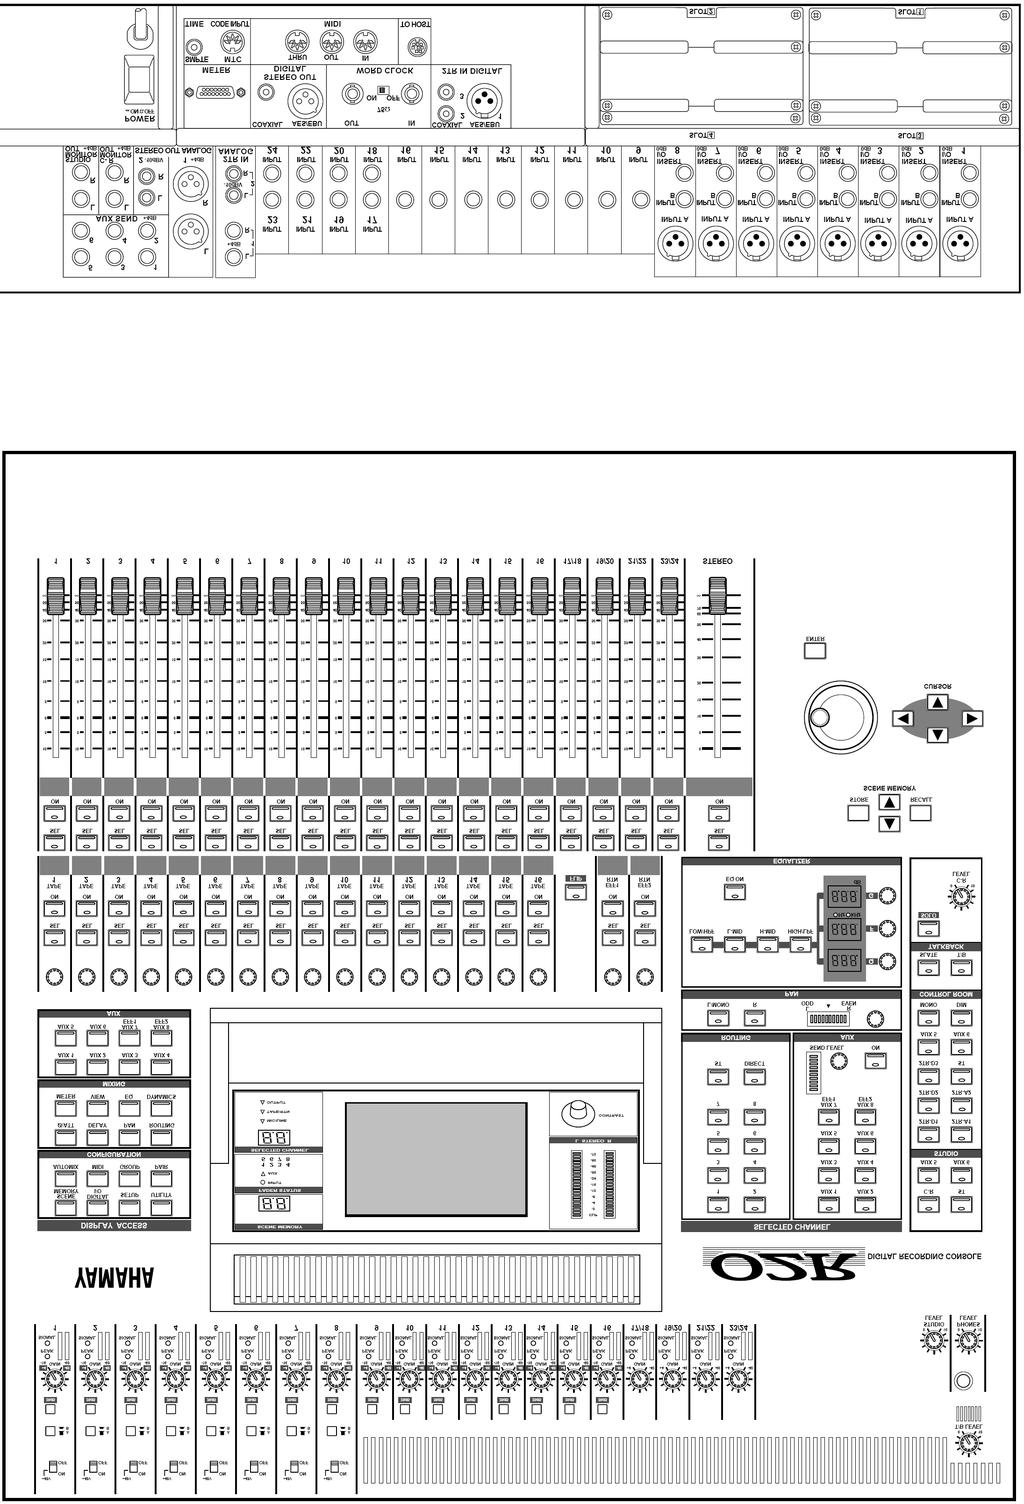 Sequencer Setup Conclusions - Before production, decisions must be made for